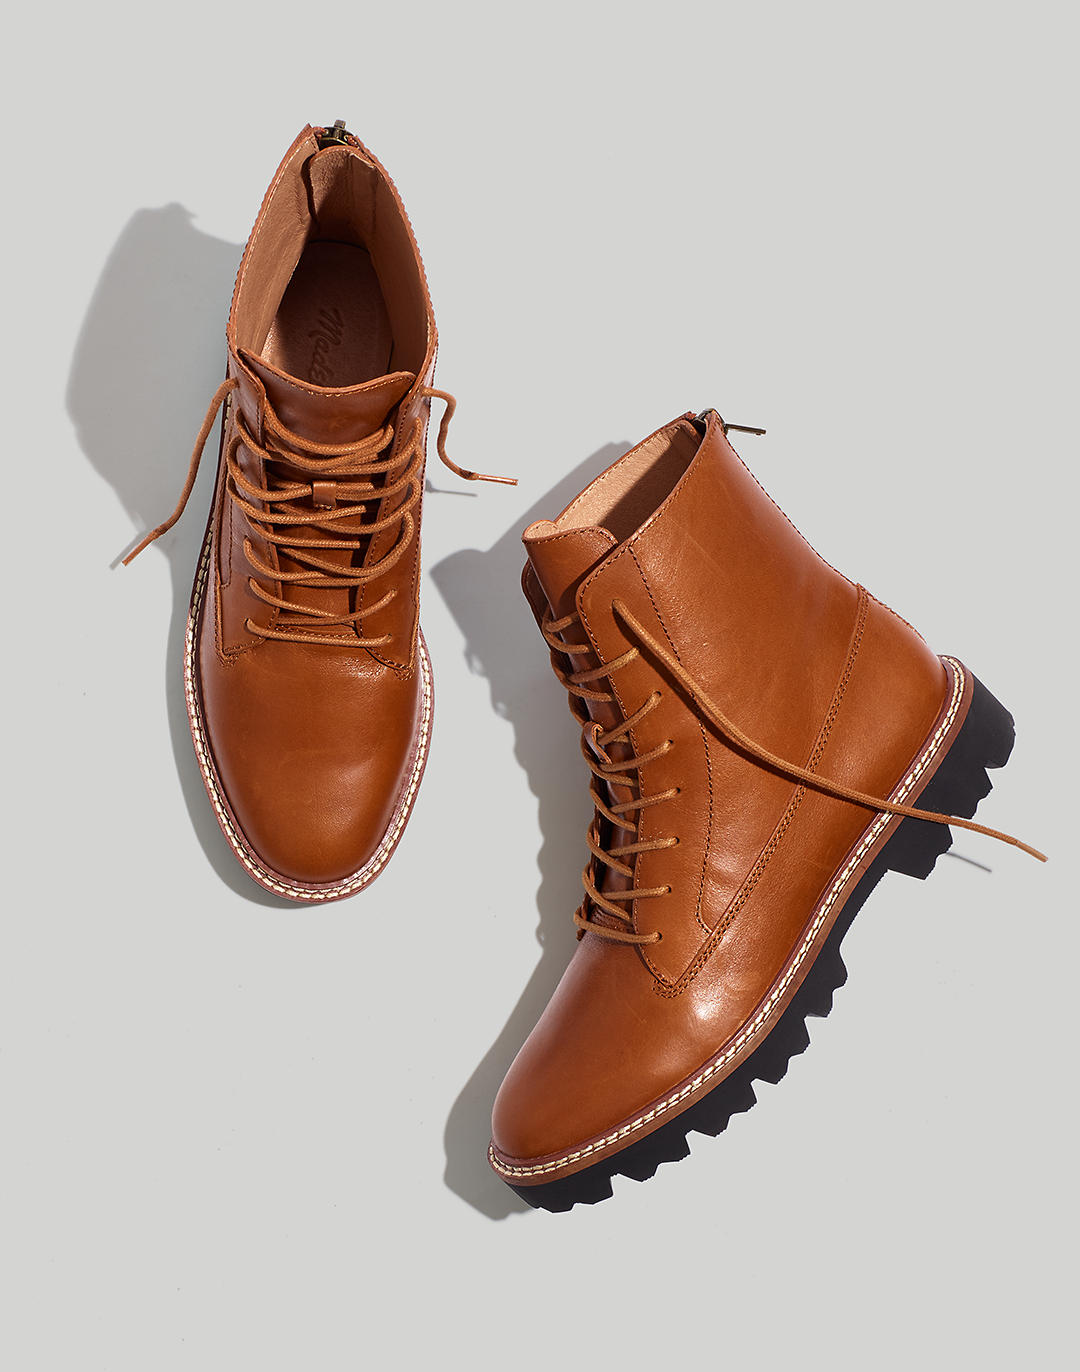 The Citywalk Lugsole Lace-Up Boot in Leather in english saddle image 1